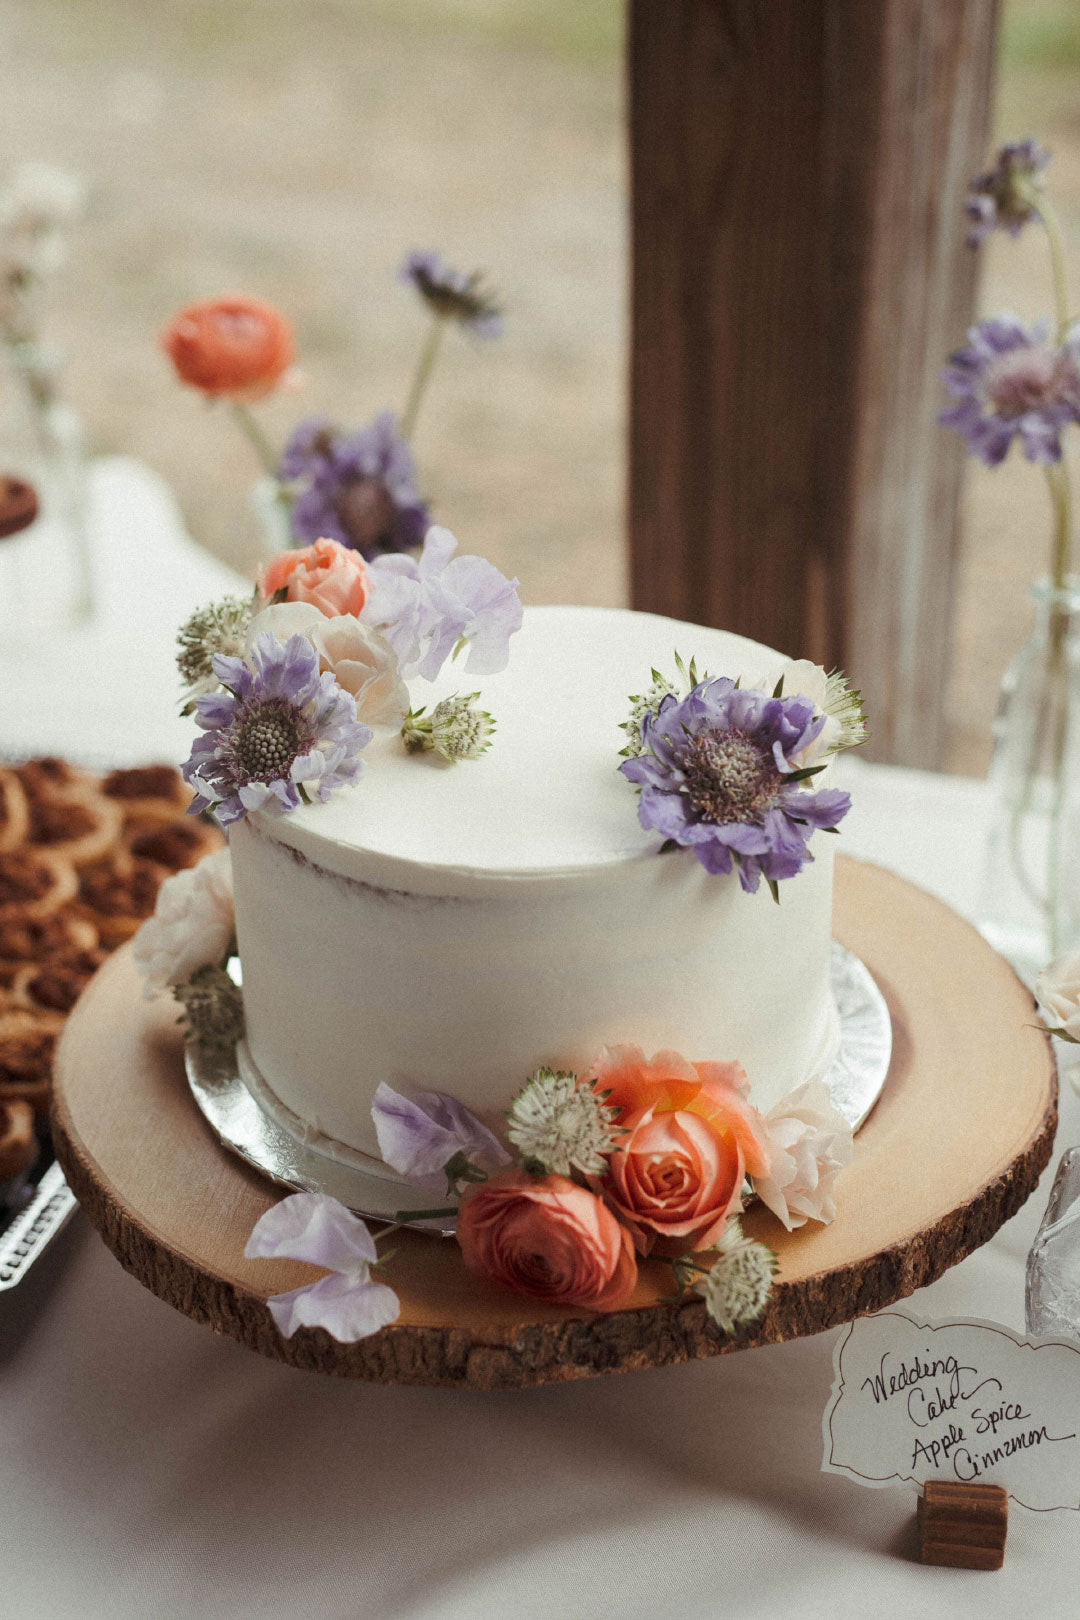 Wedding cake with floral decorations